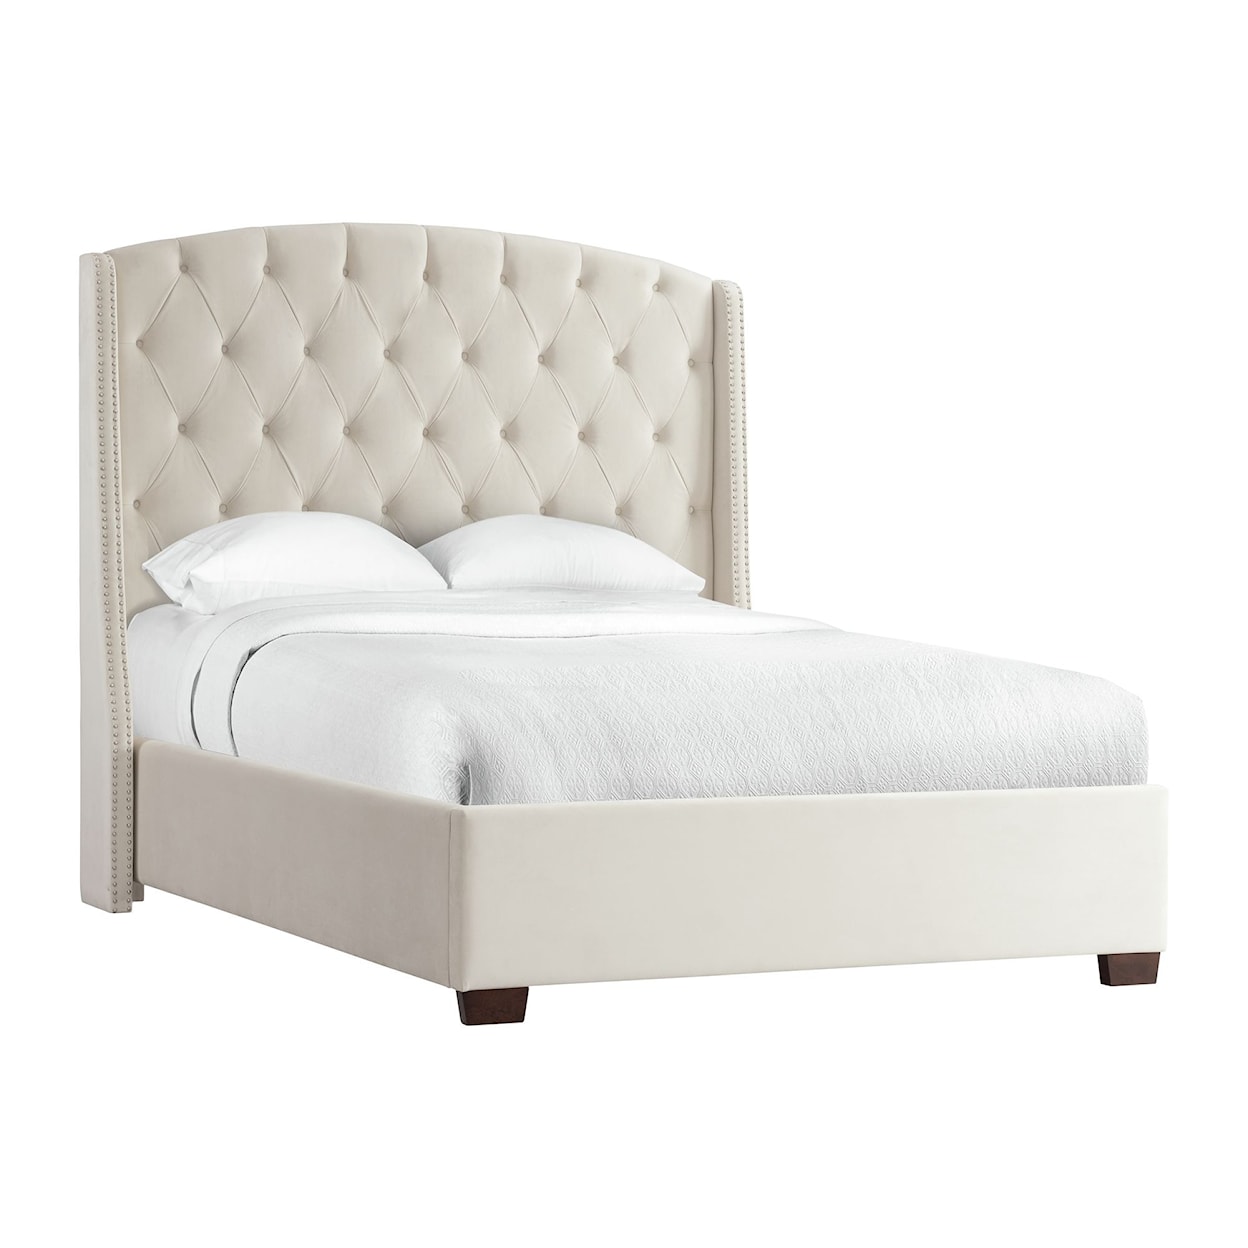 Elements International Foster King Bed